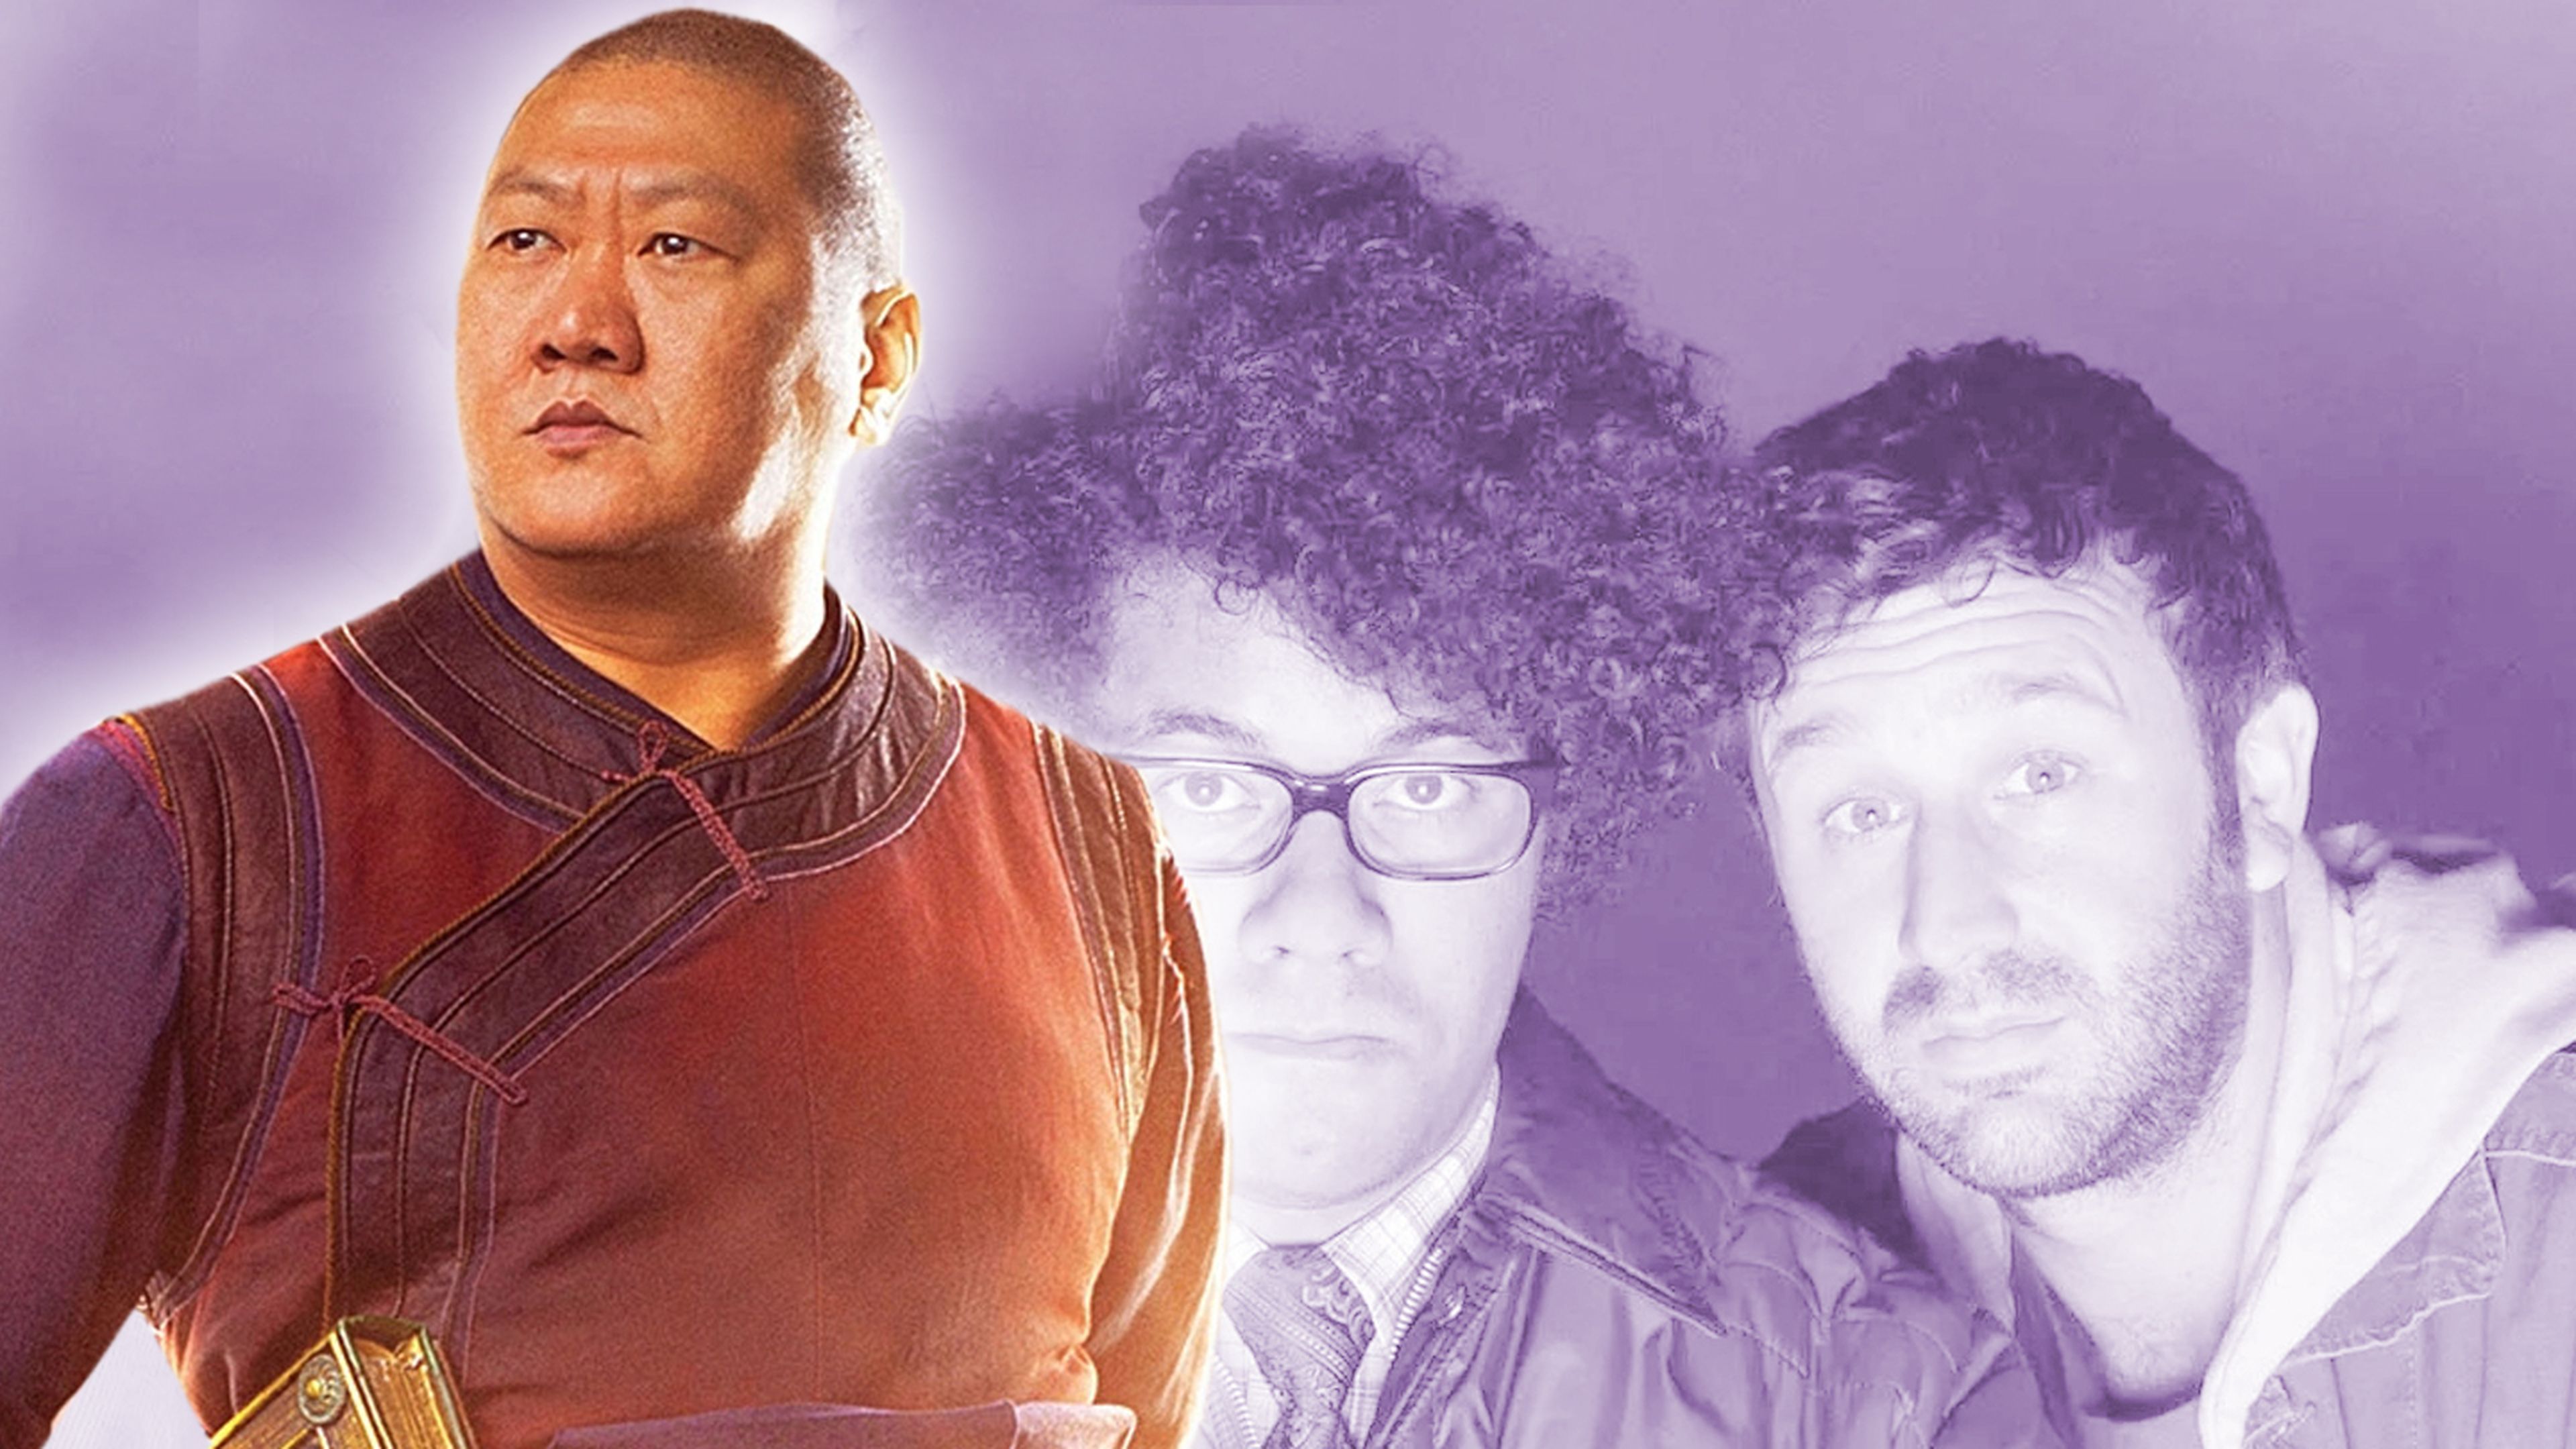 Benedict Wong - The IT Crowd